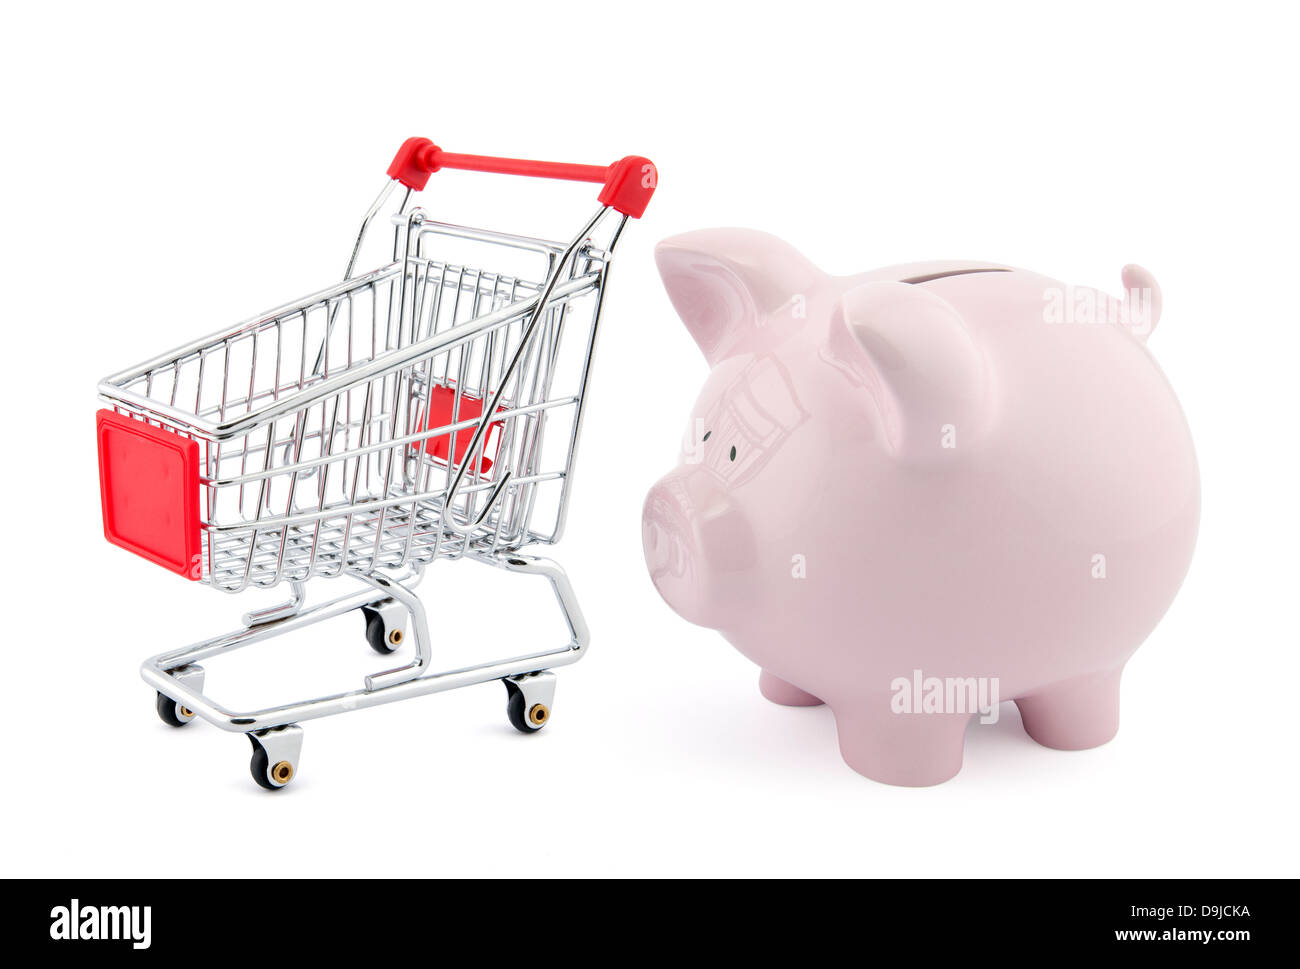 Piggy bank with shopping cart Stock Photo